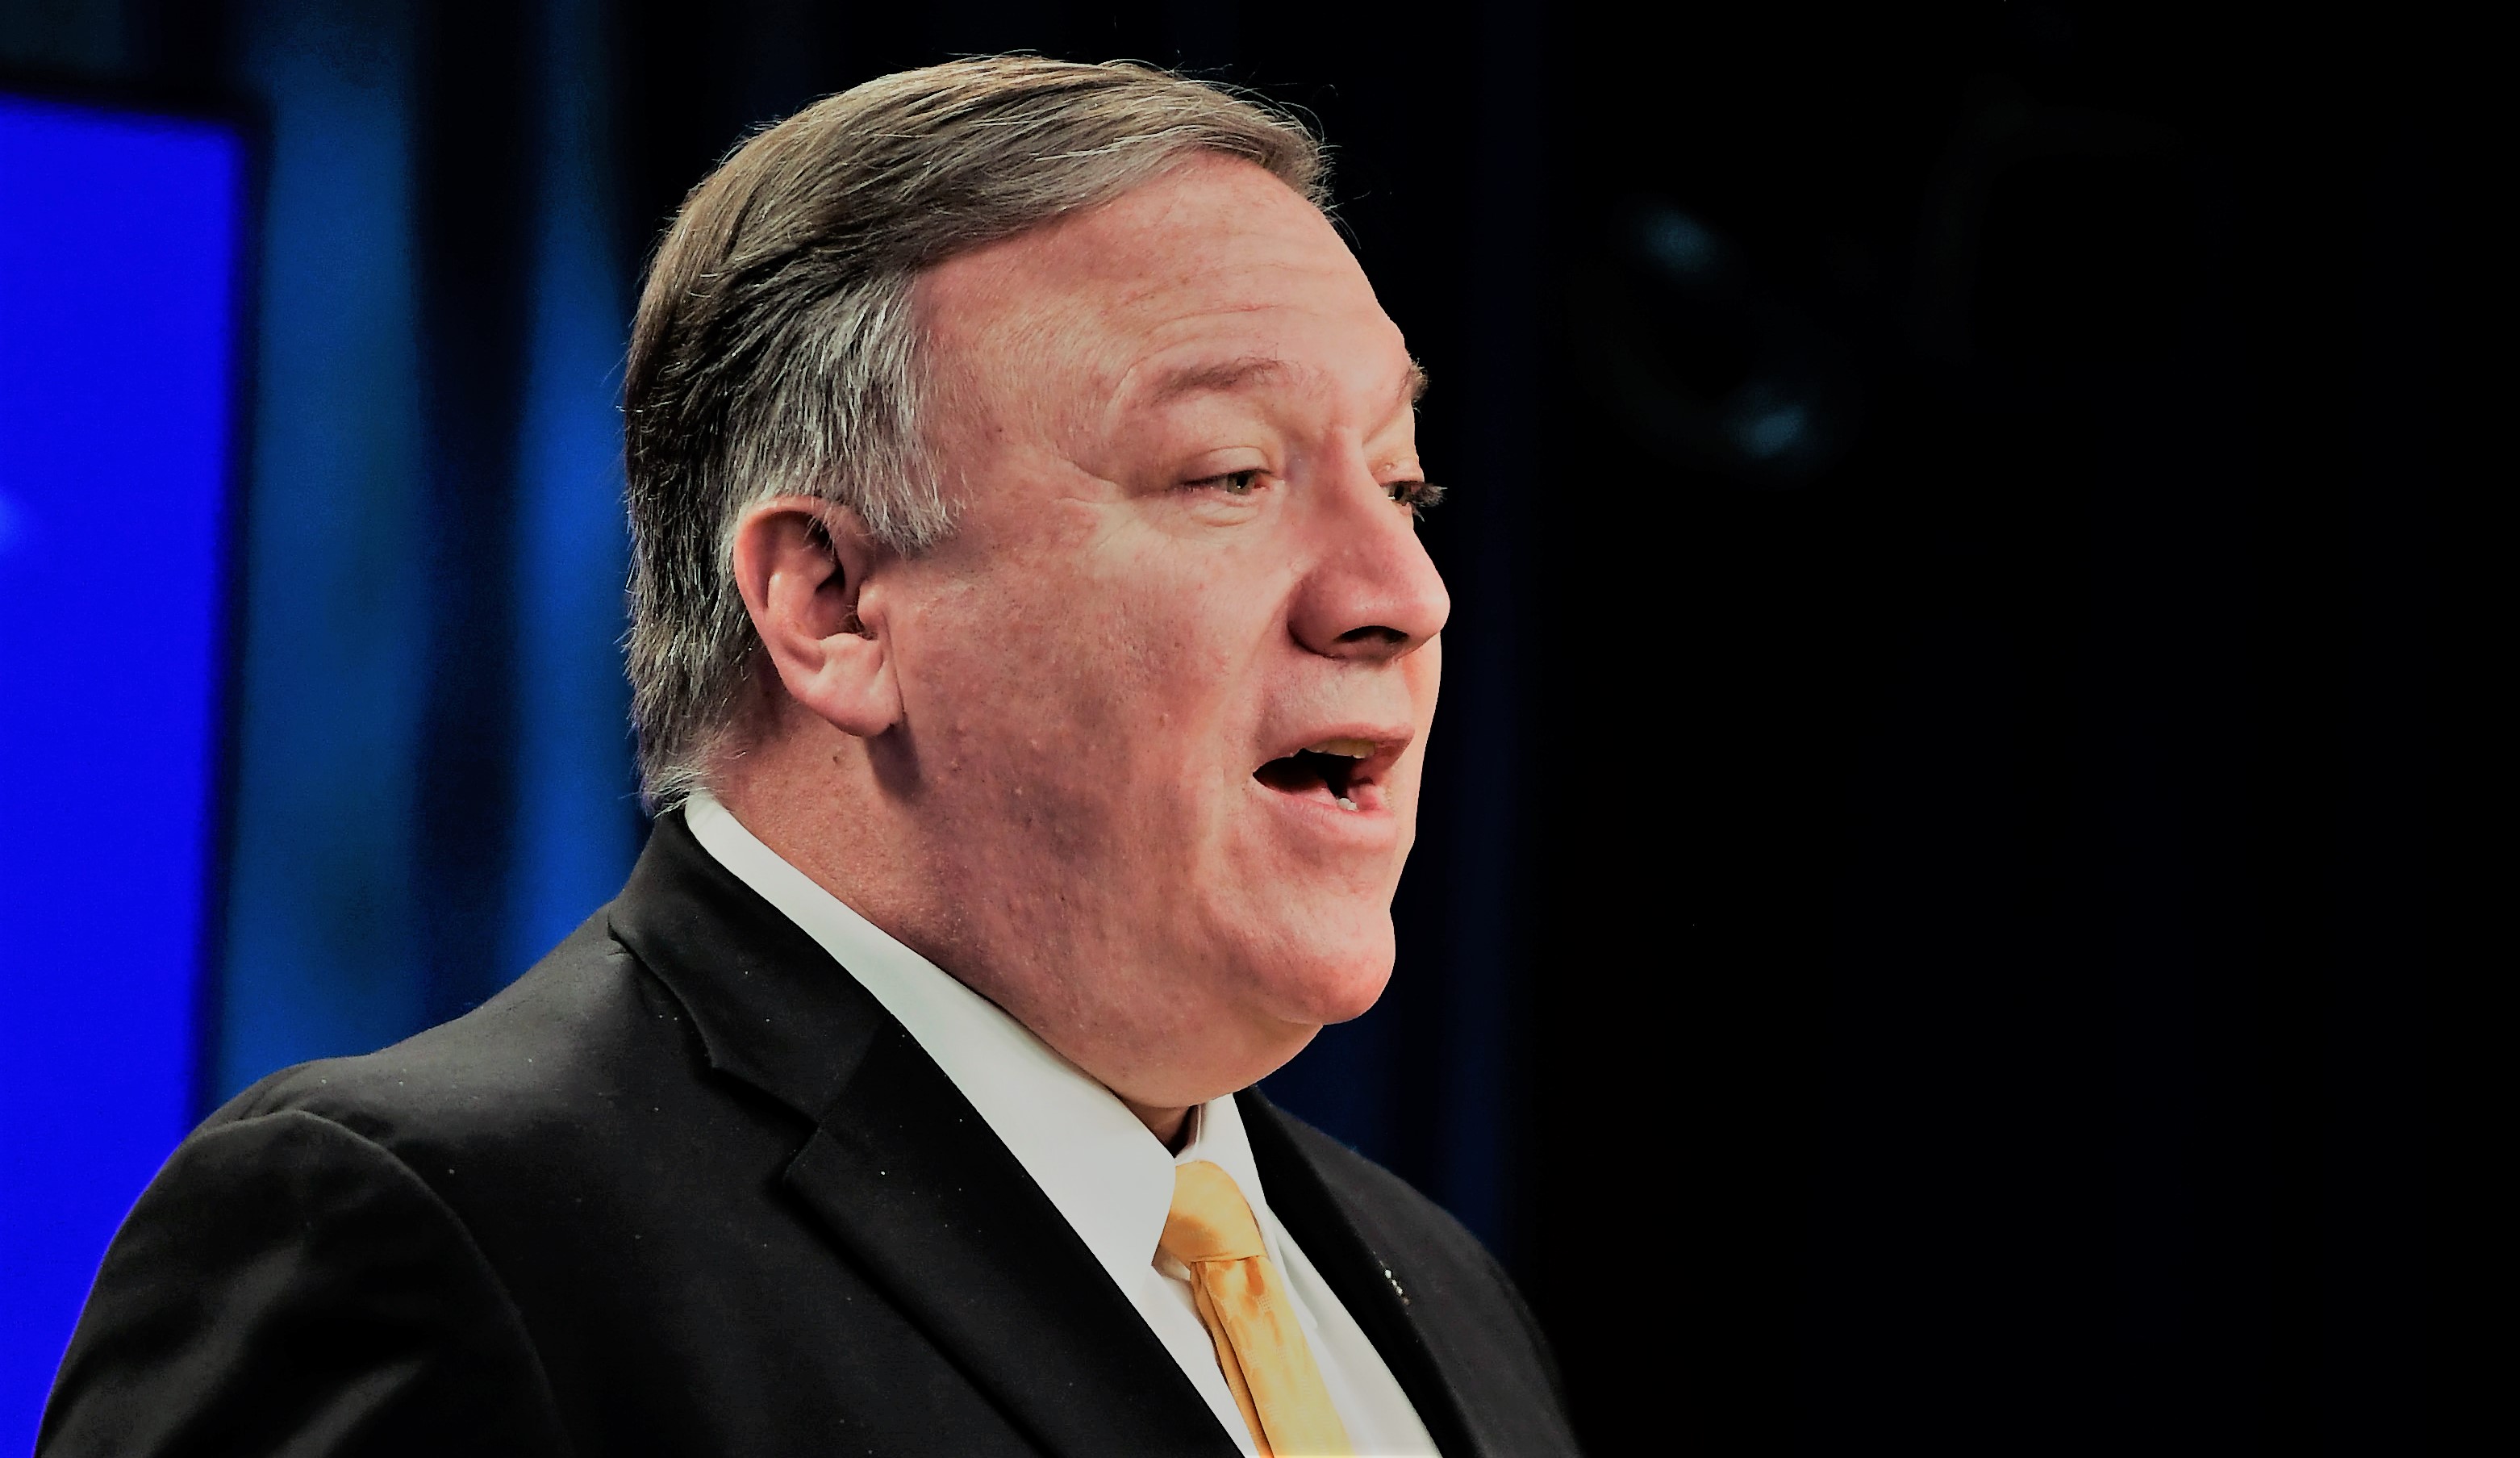 China renews attack on Pompeo, says Communist Party criticism 'dangerous'